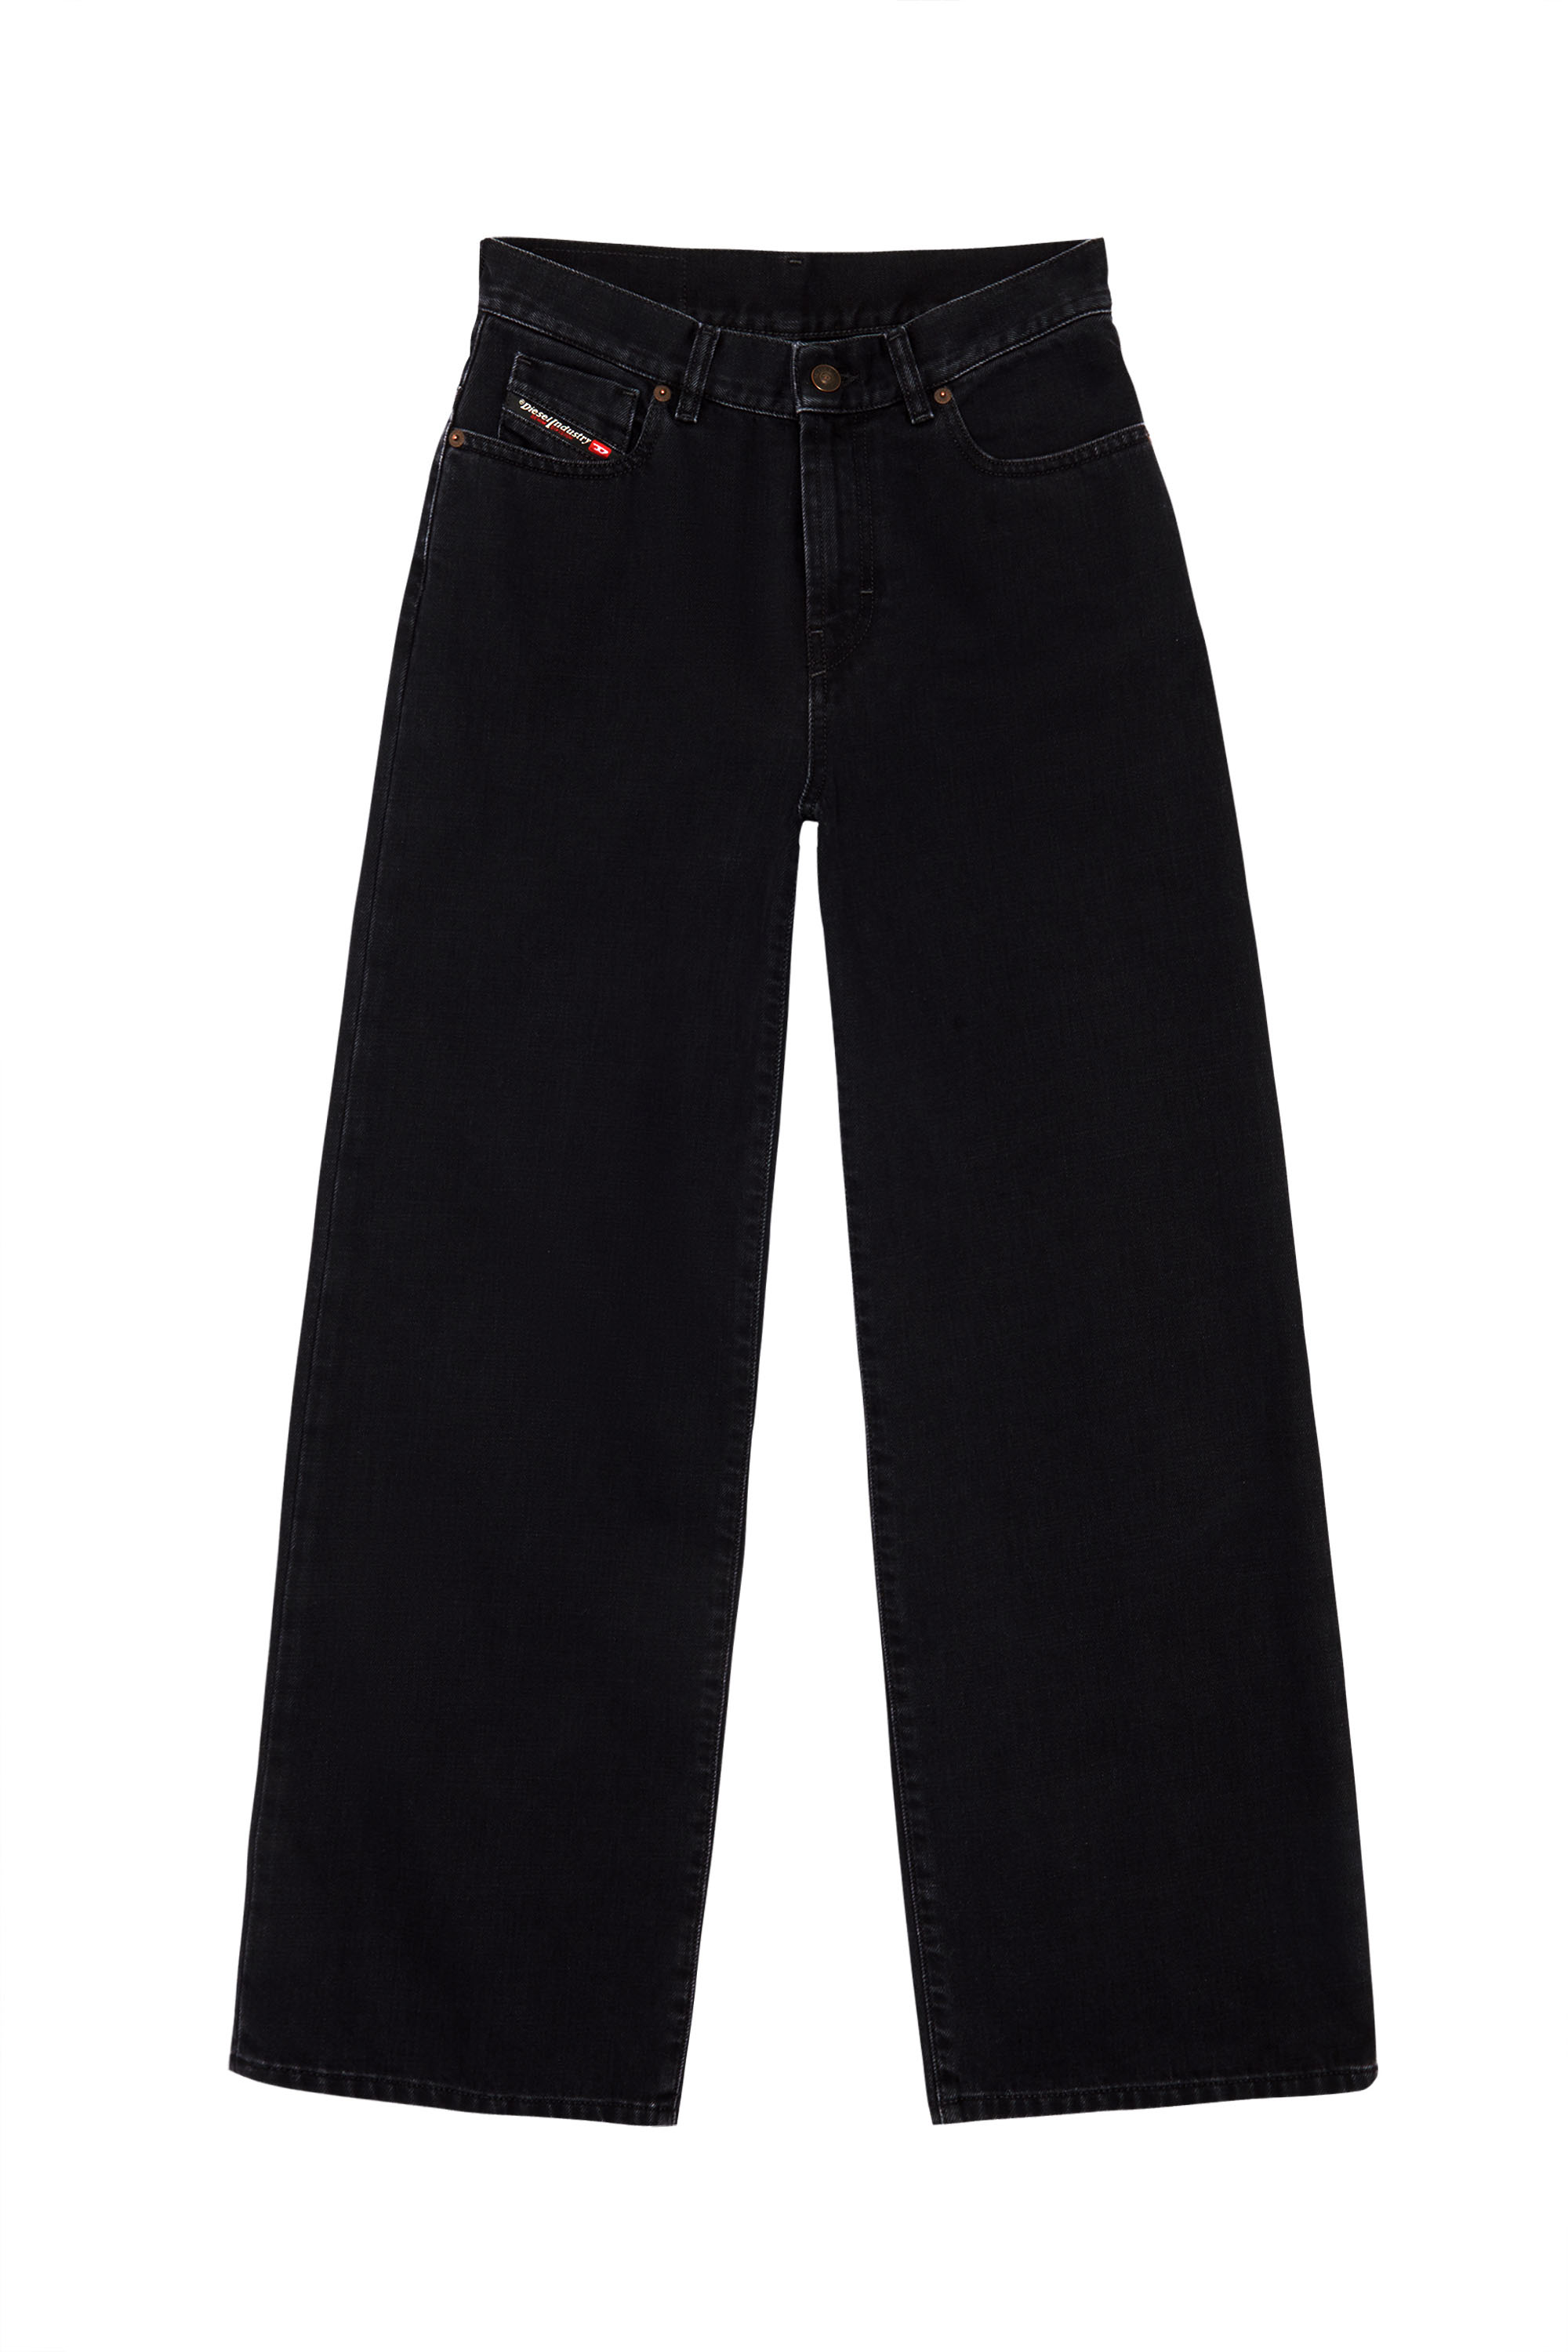 Bootcut and Flare Jeans 2000 Widee Z09RL, Nero/Grigio scuro - Jeans